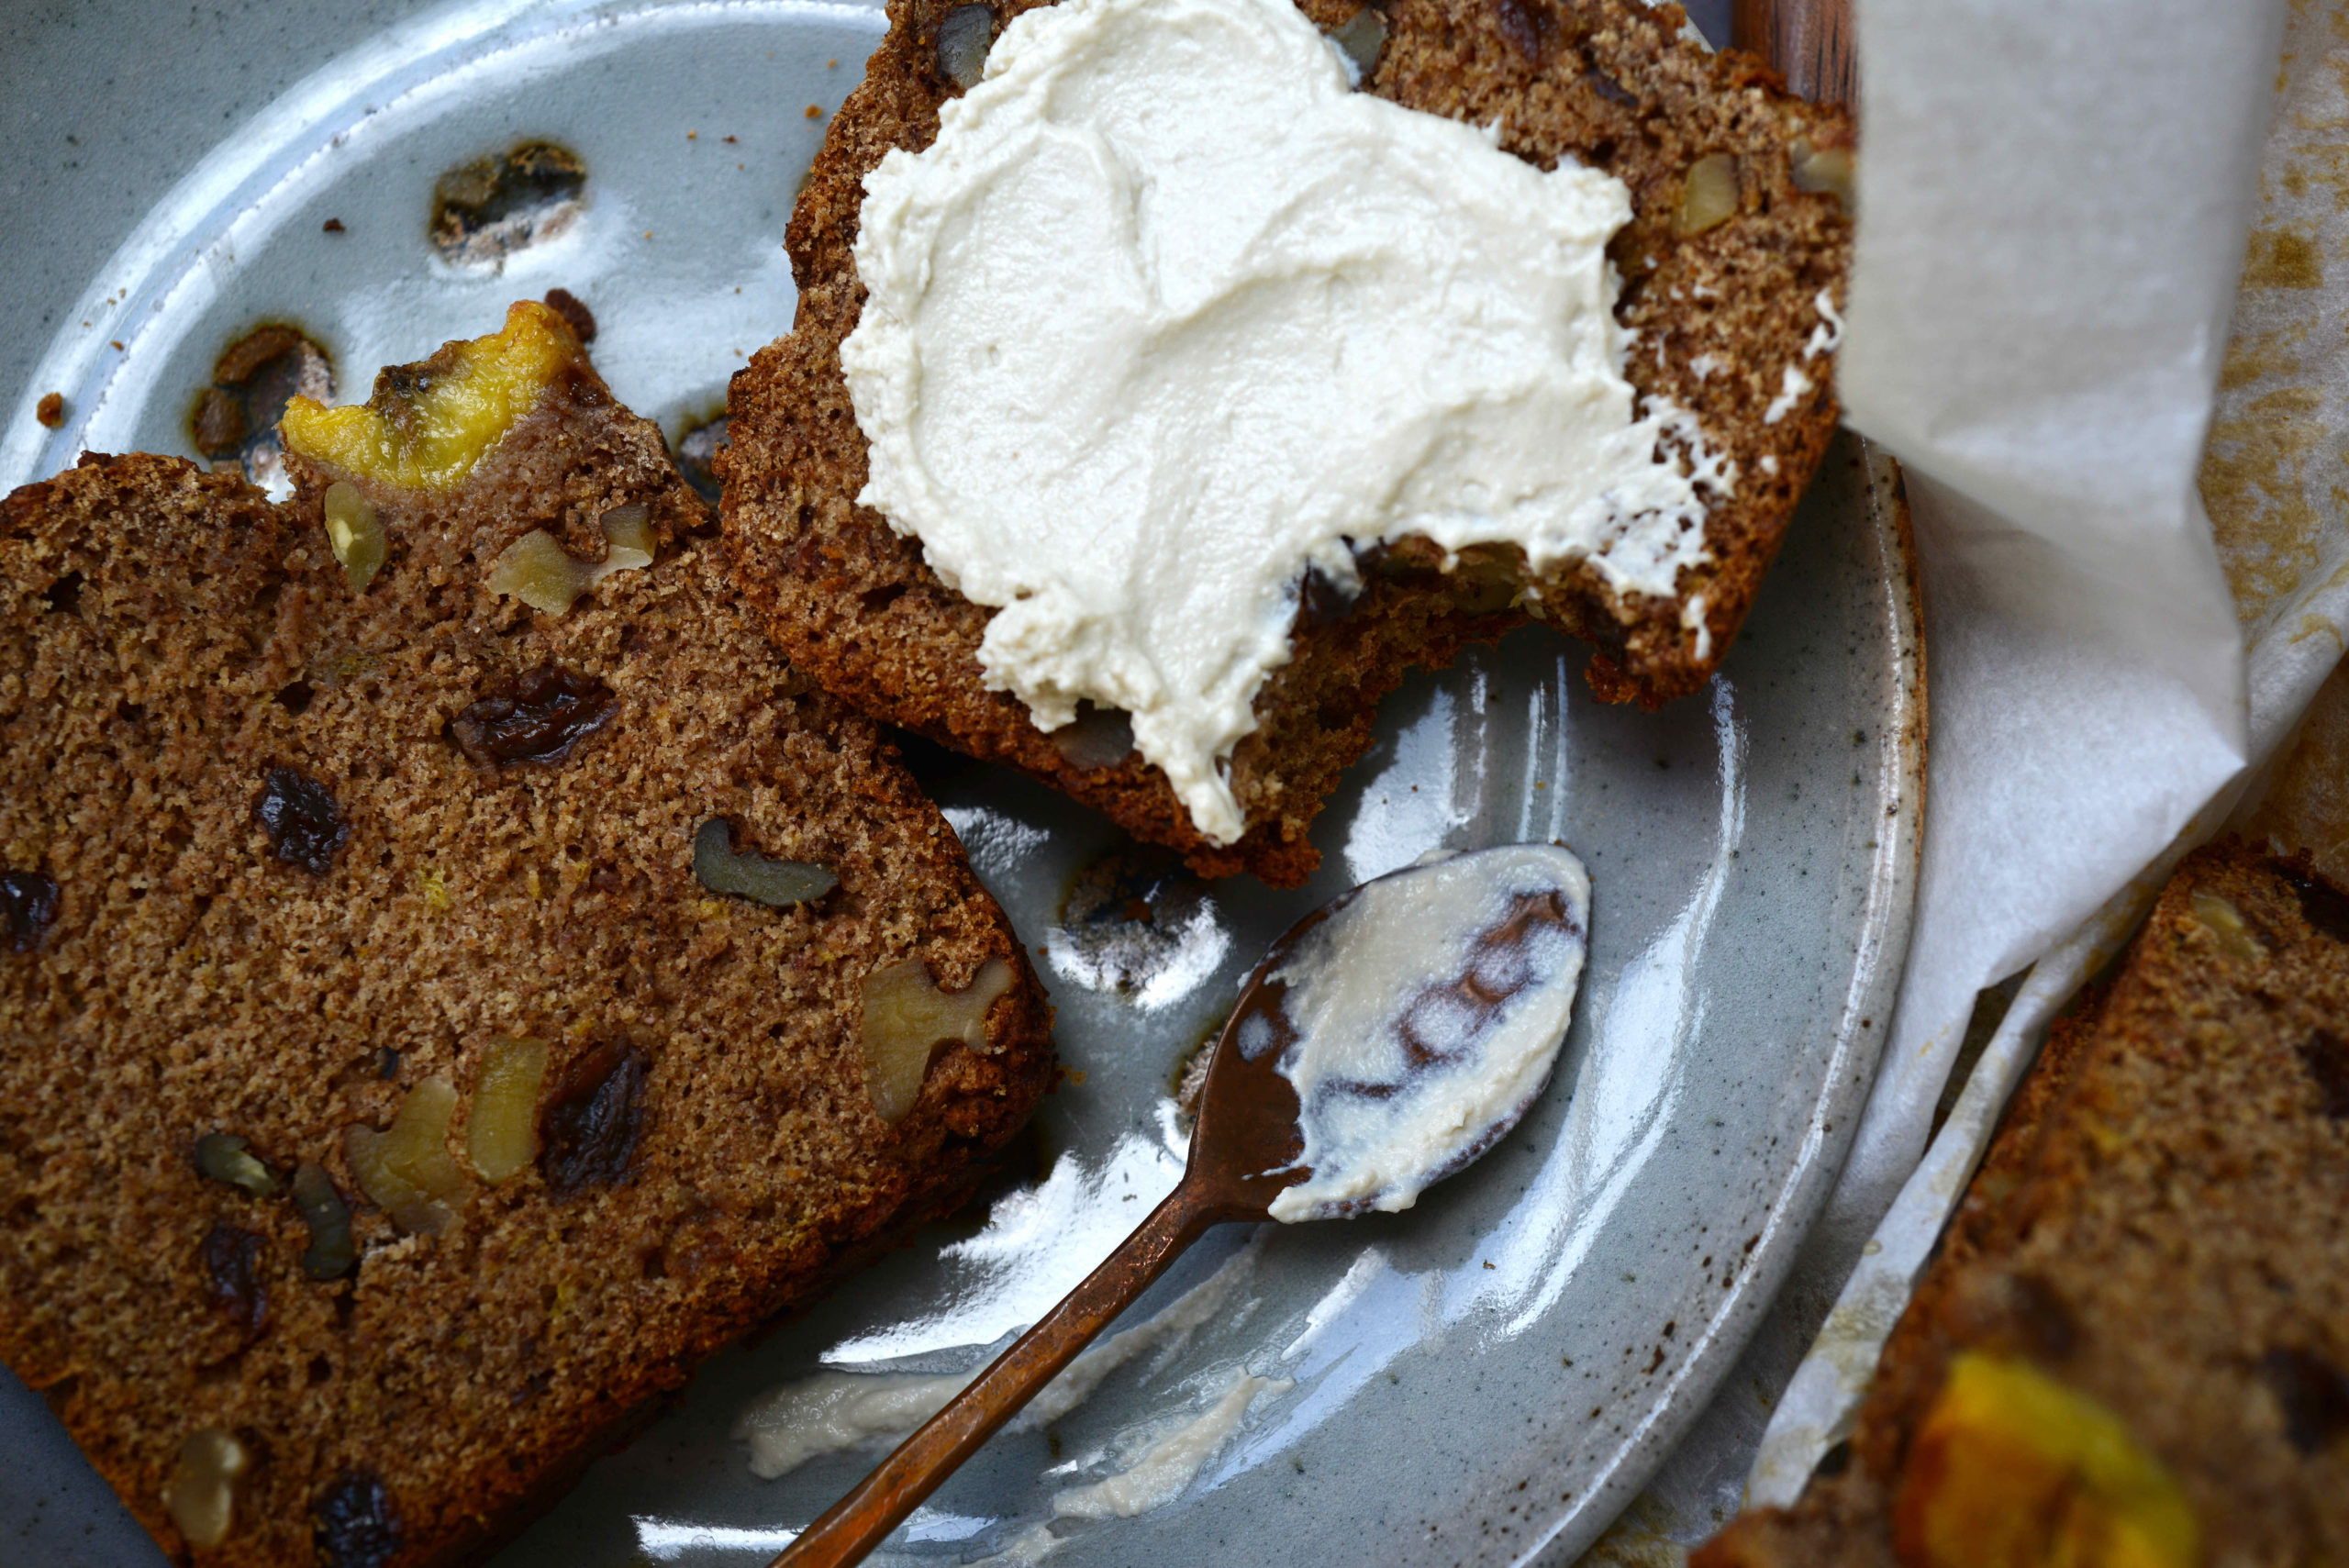 two slices of Fruit-Sweetened Healthy Vegan Banana Bread (version with raisins and walnuts) on blue plate with spoon - one slice spread with homemade vegan yogurt